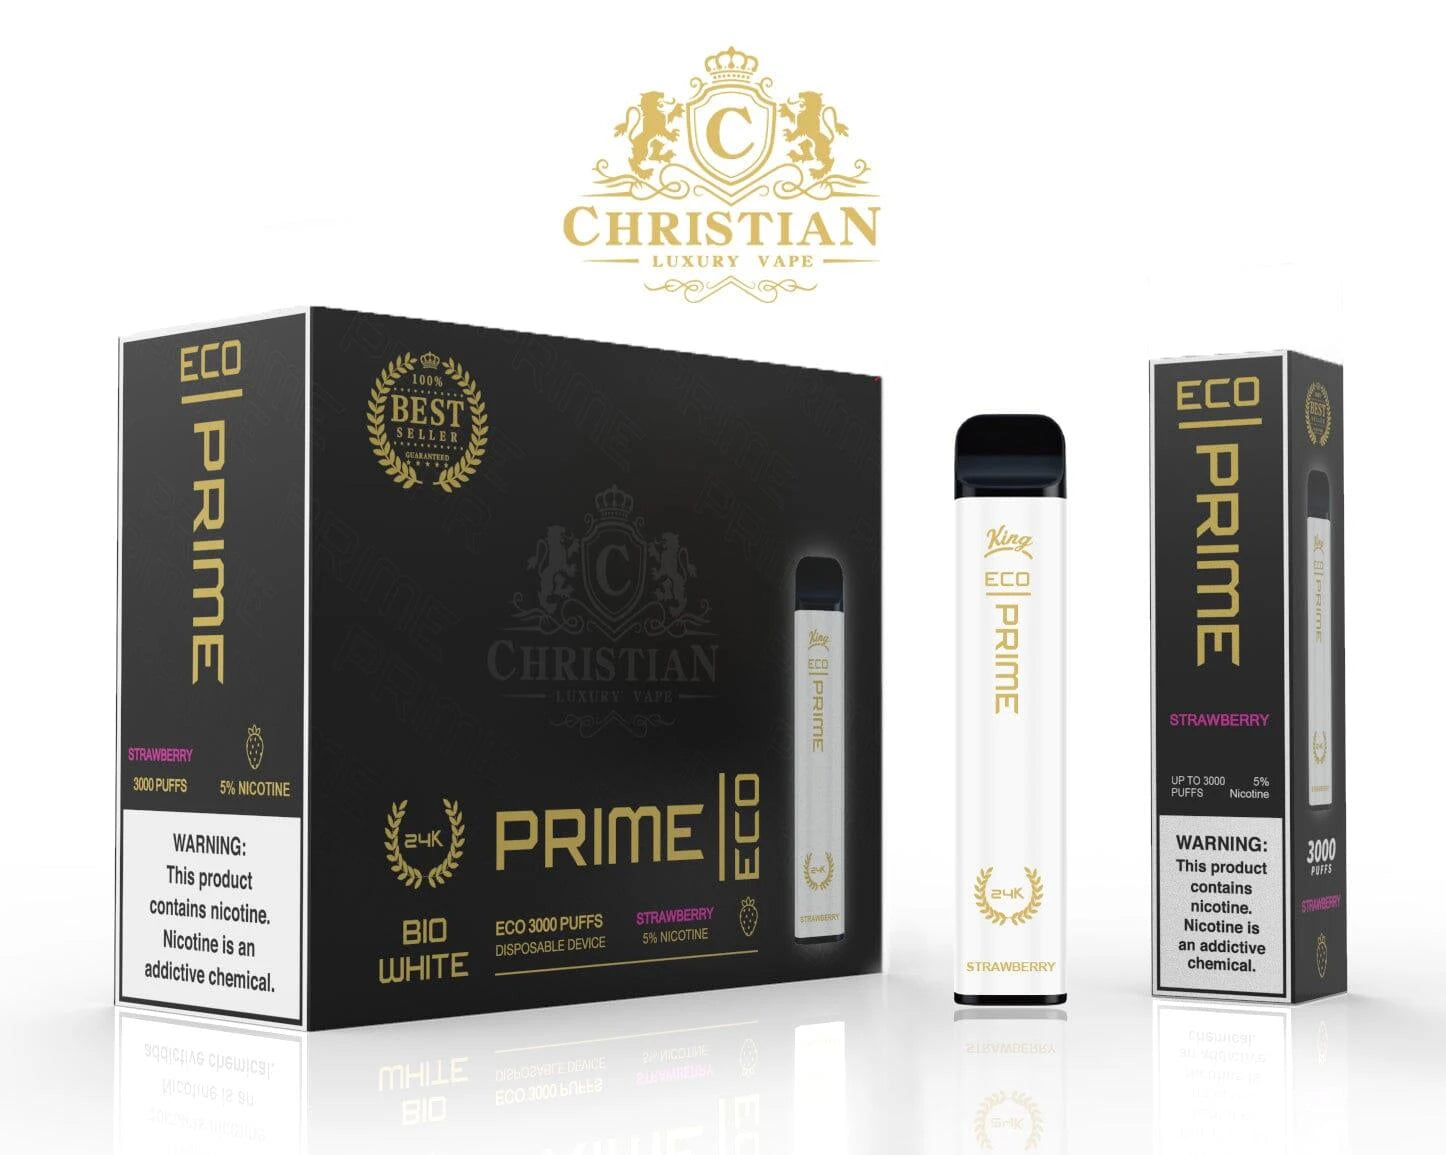 Eco Prime 3000 Puffs Disposable Vape - 3 Pack